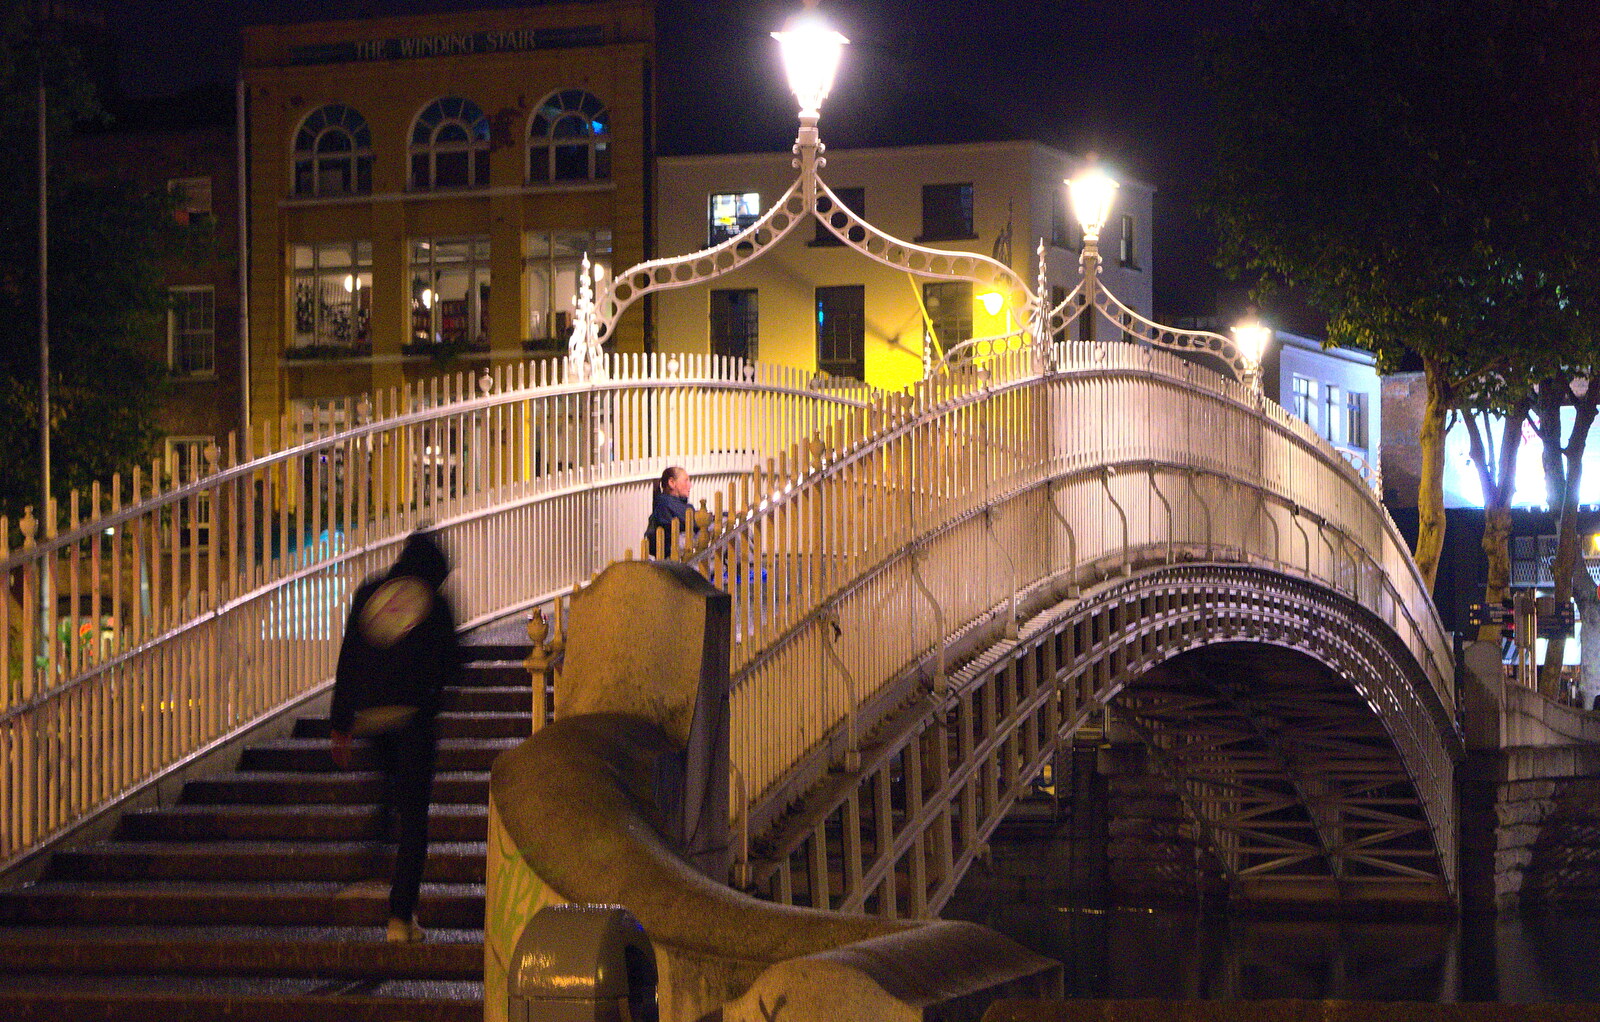 The Halfpenny Bridge over the Liffey from A Night Out in Dublin, County Dublin, Ireland - 9th August 2014